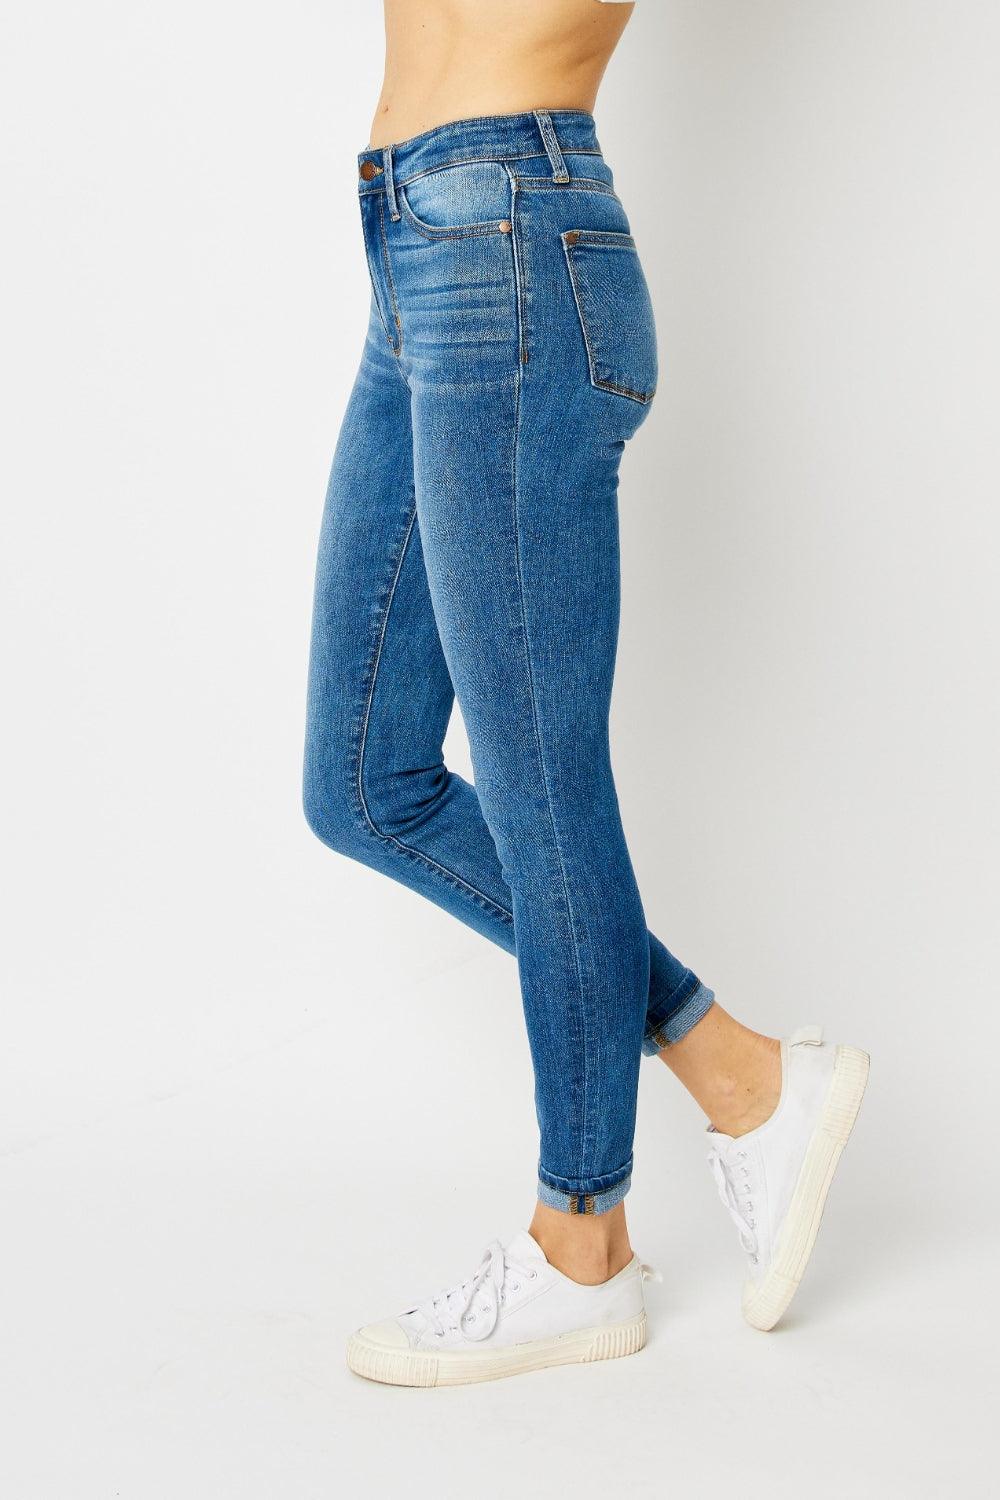 Judy Blue Full Size Cuffed Hem Skinny Jeans - God's Girl Gifts And Apparel